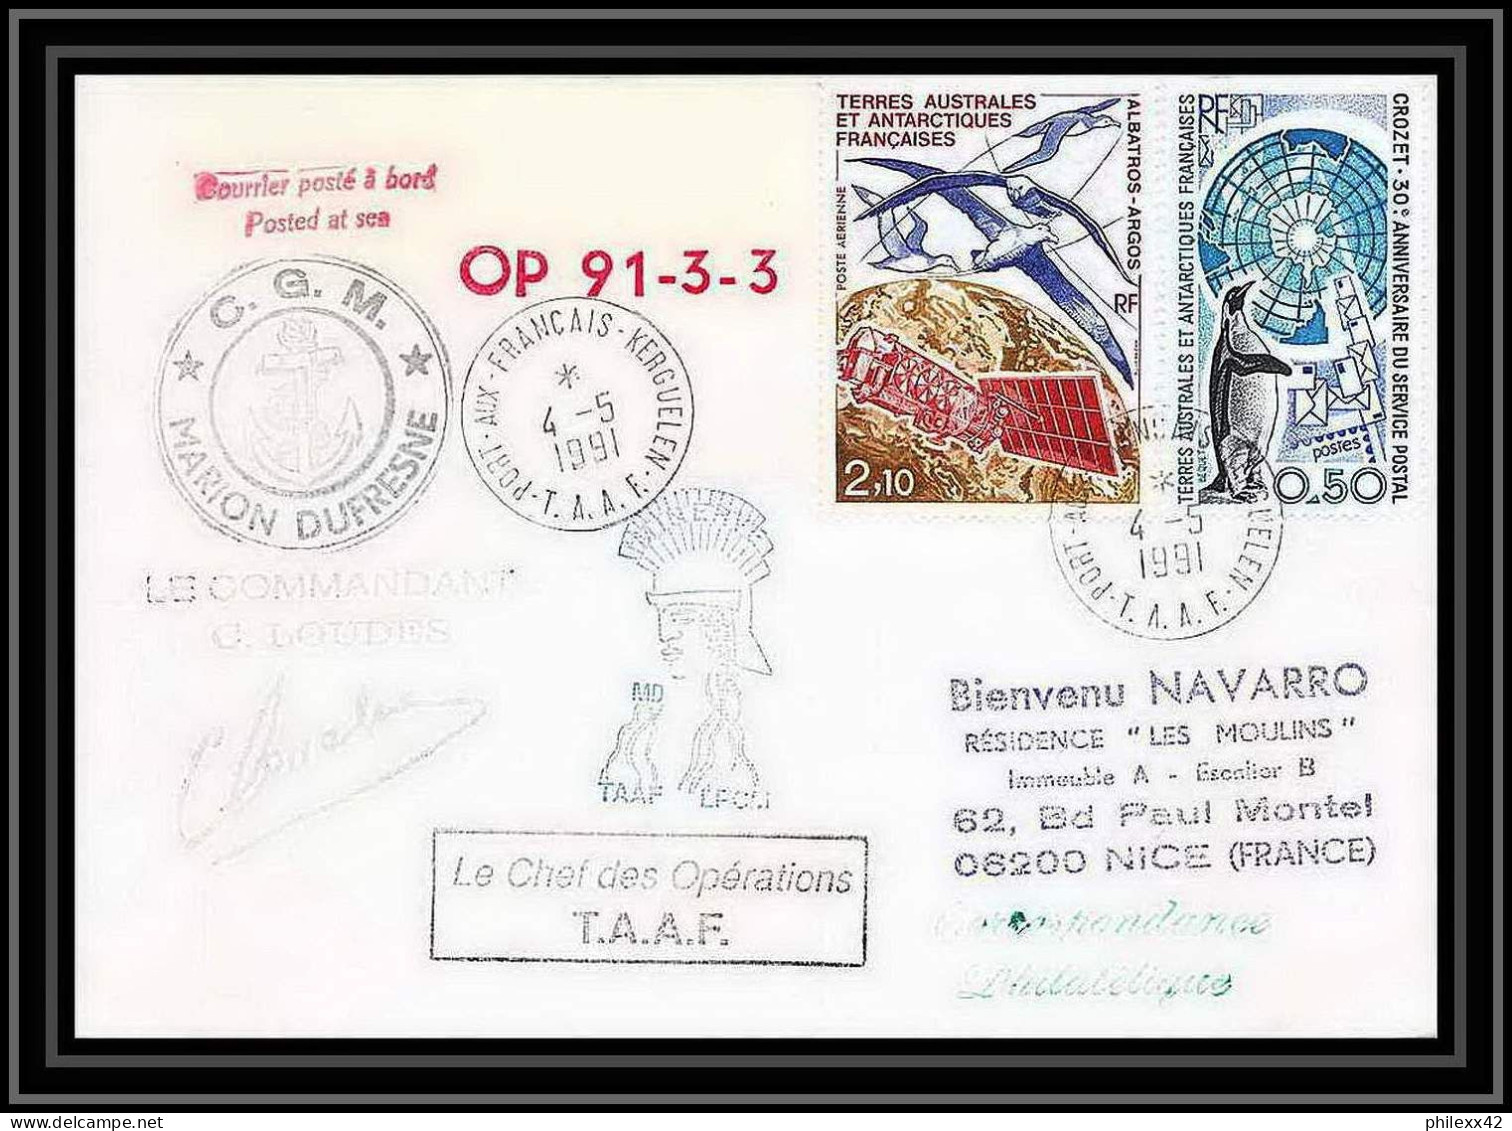 1765 Md 68 Op 91-3-3 Suzil Signé Signed Loudes Marion Dufresne 4/5/1991 TAAF Antarctic Terres Australes Lettre (cover) - Antarktis-Expeditionen